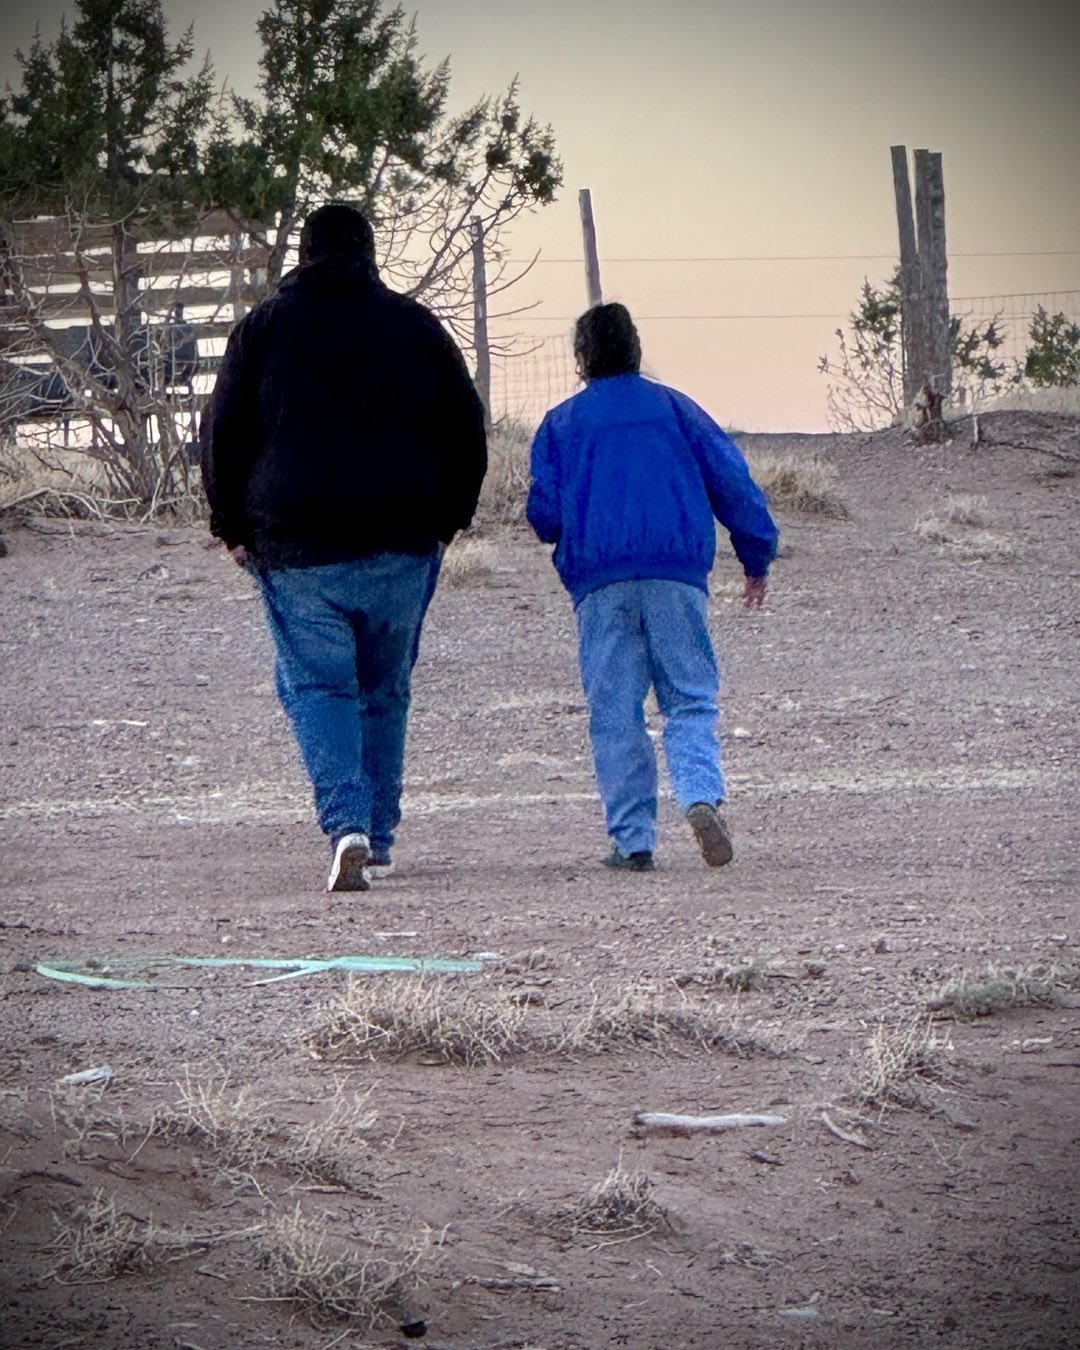 Heading home&hellip;
Granny and grandson.

Our work on the reservation is done for now.  We completed a total renovation for a couple who have had much adversity in their lives.  It was a humbling experience and so much was received by by all involve